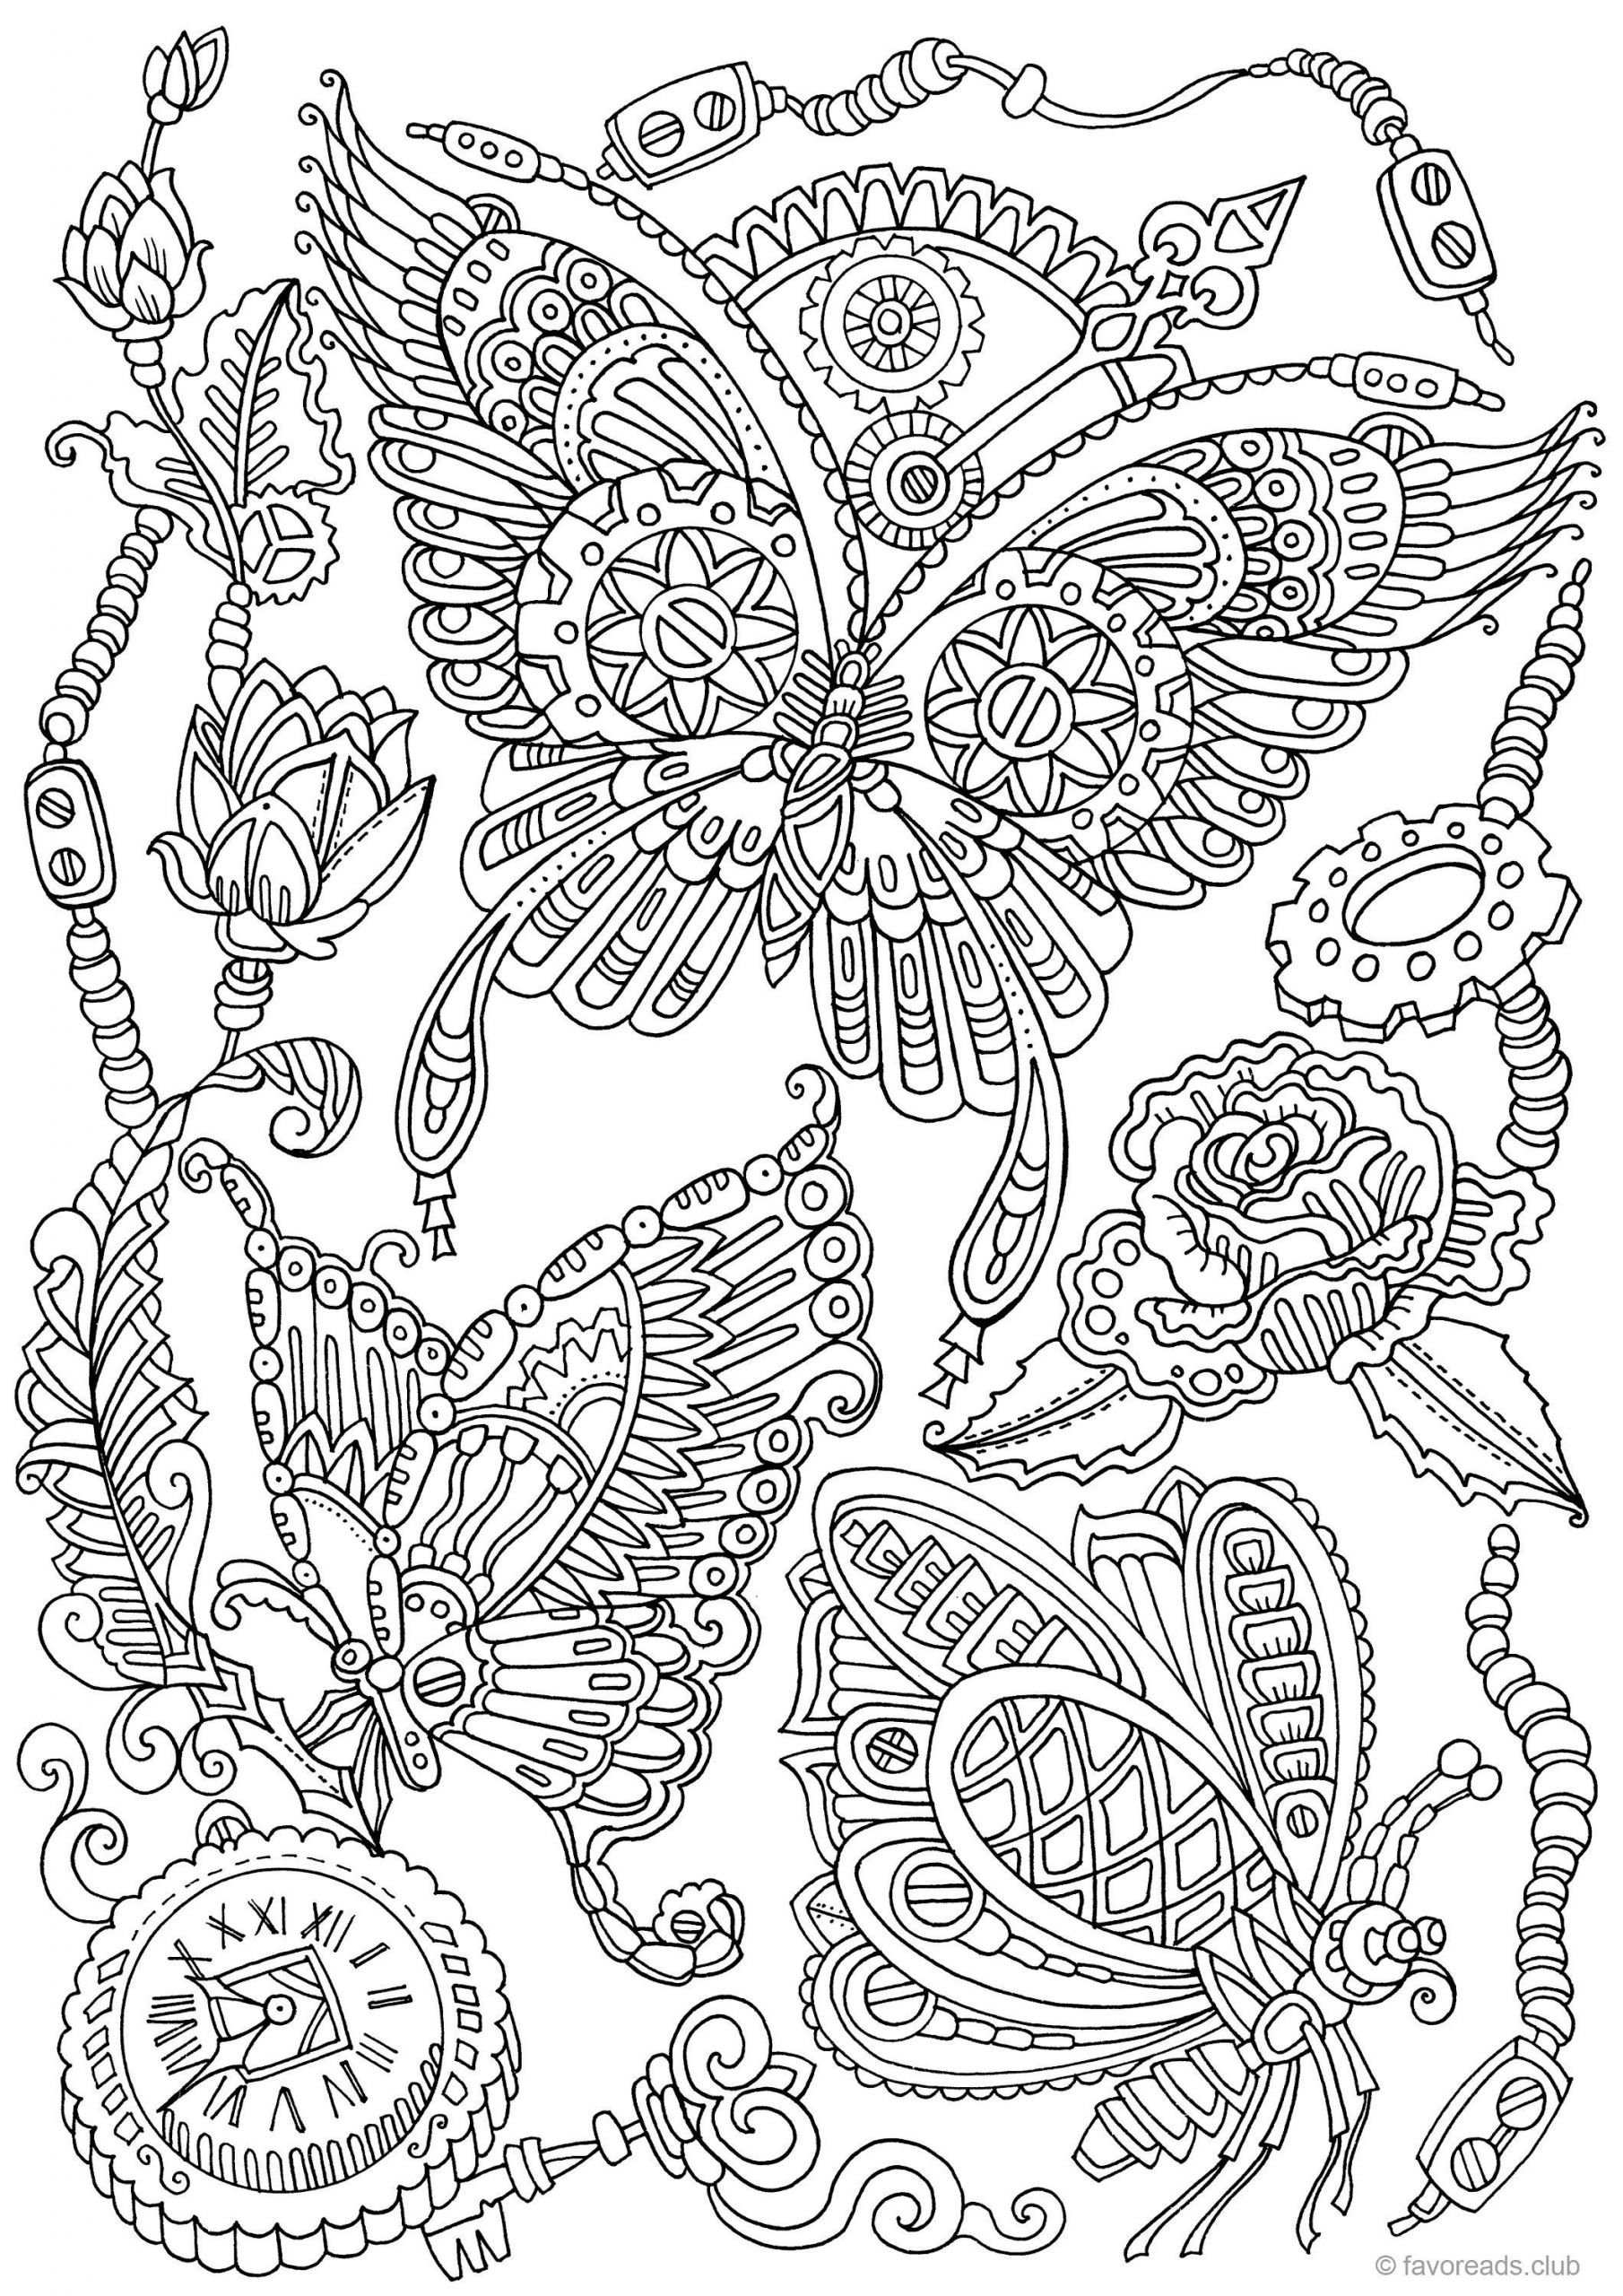 Adult Coloring Book Pictures
 Steampunk Butterflies Printable Adult Coloring Page from